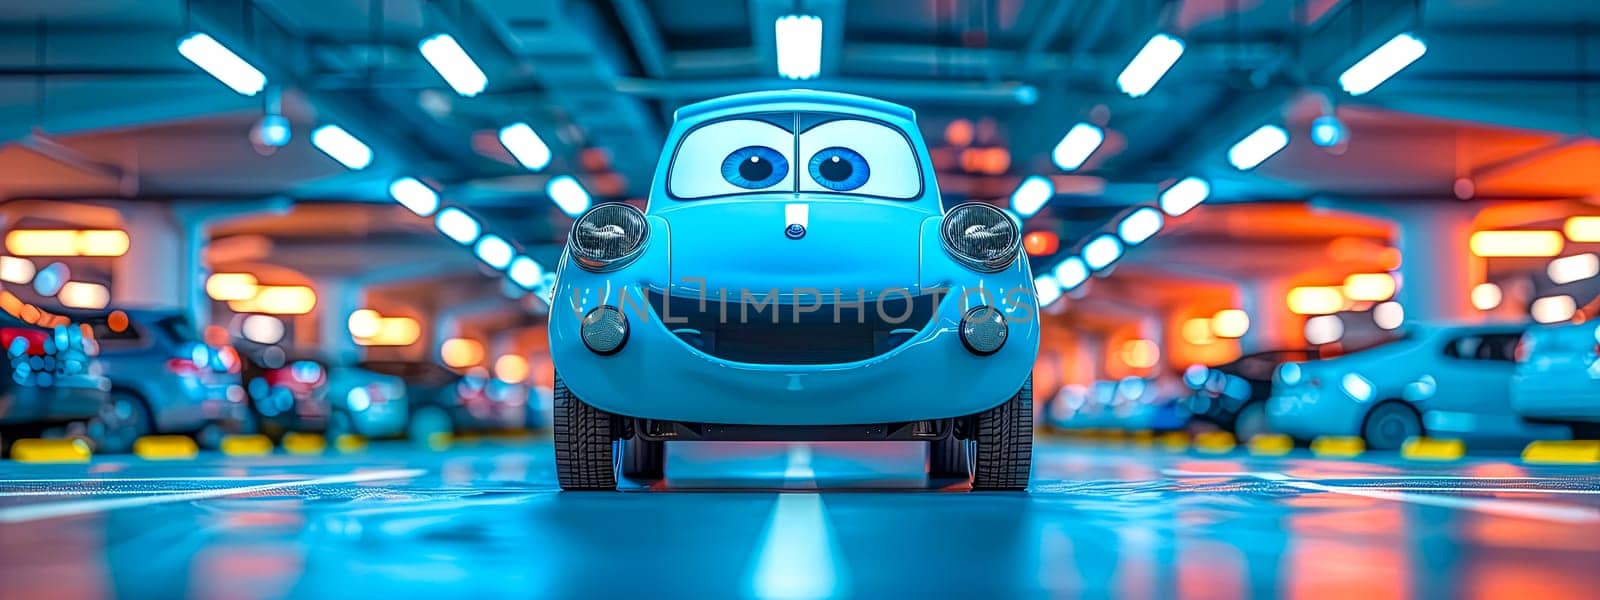 Animated Blue Car Character in Colorful Car Dealership by Edophoto